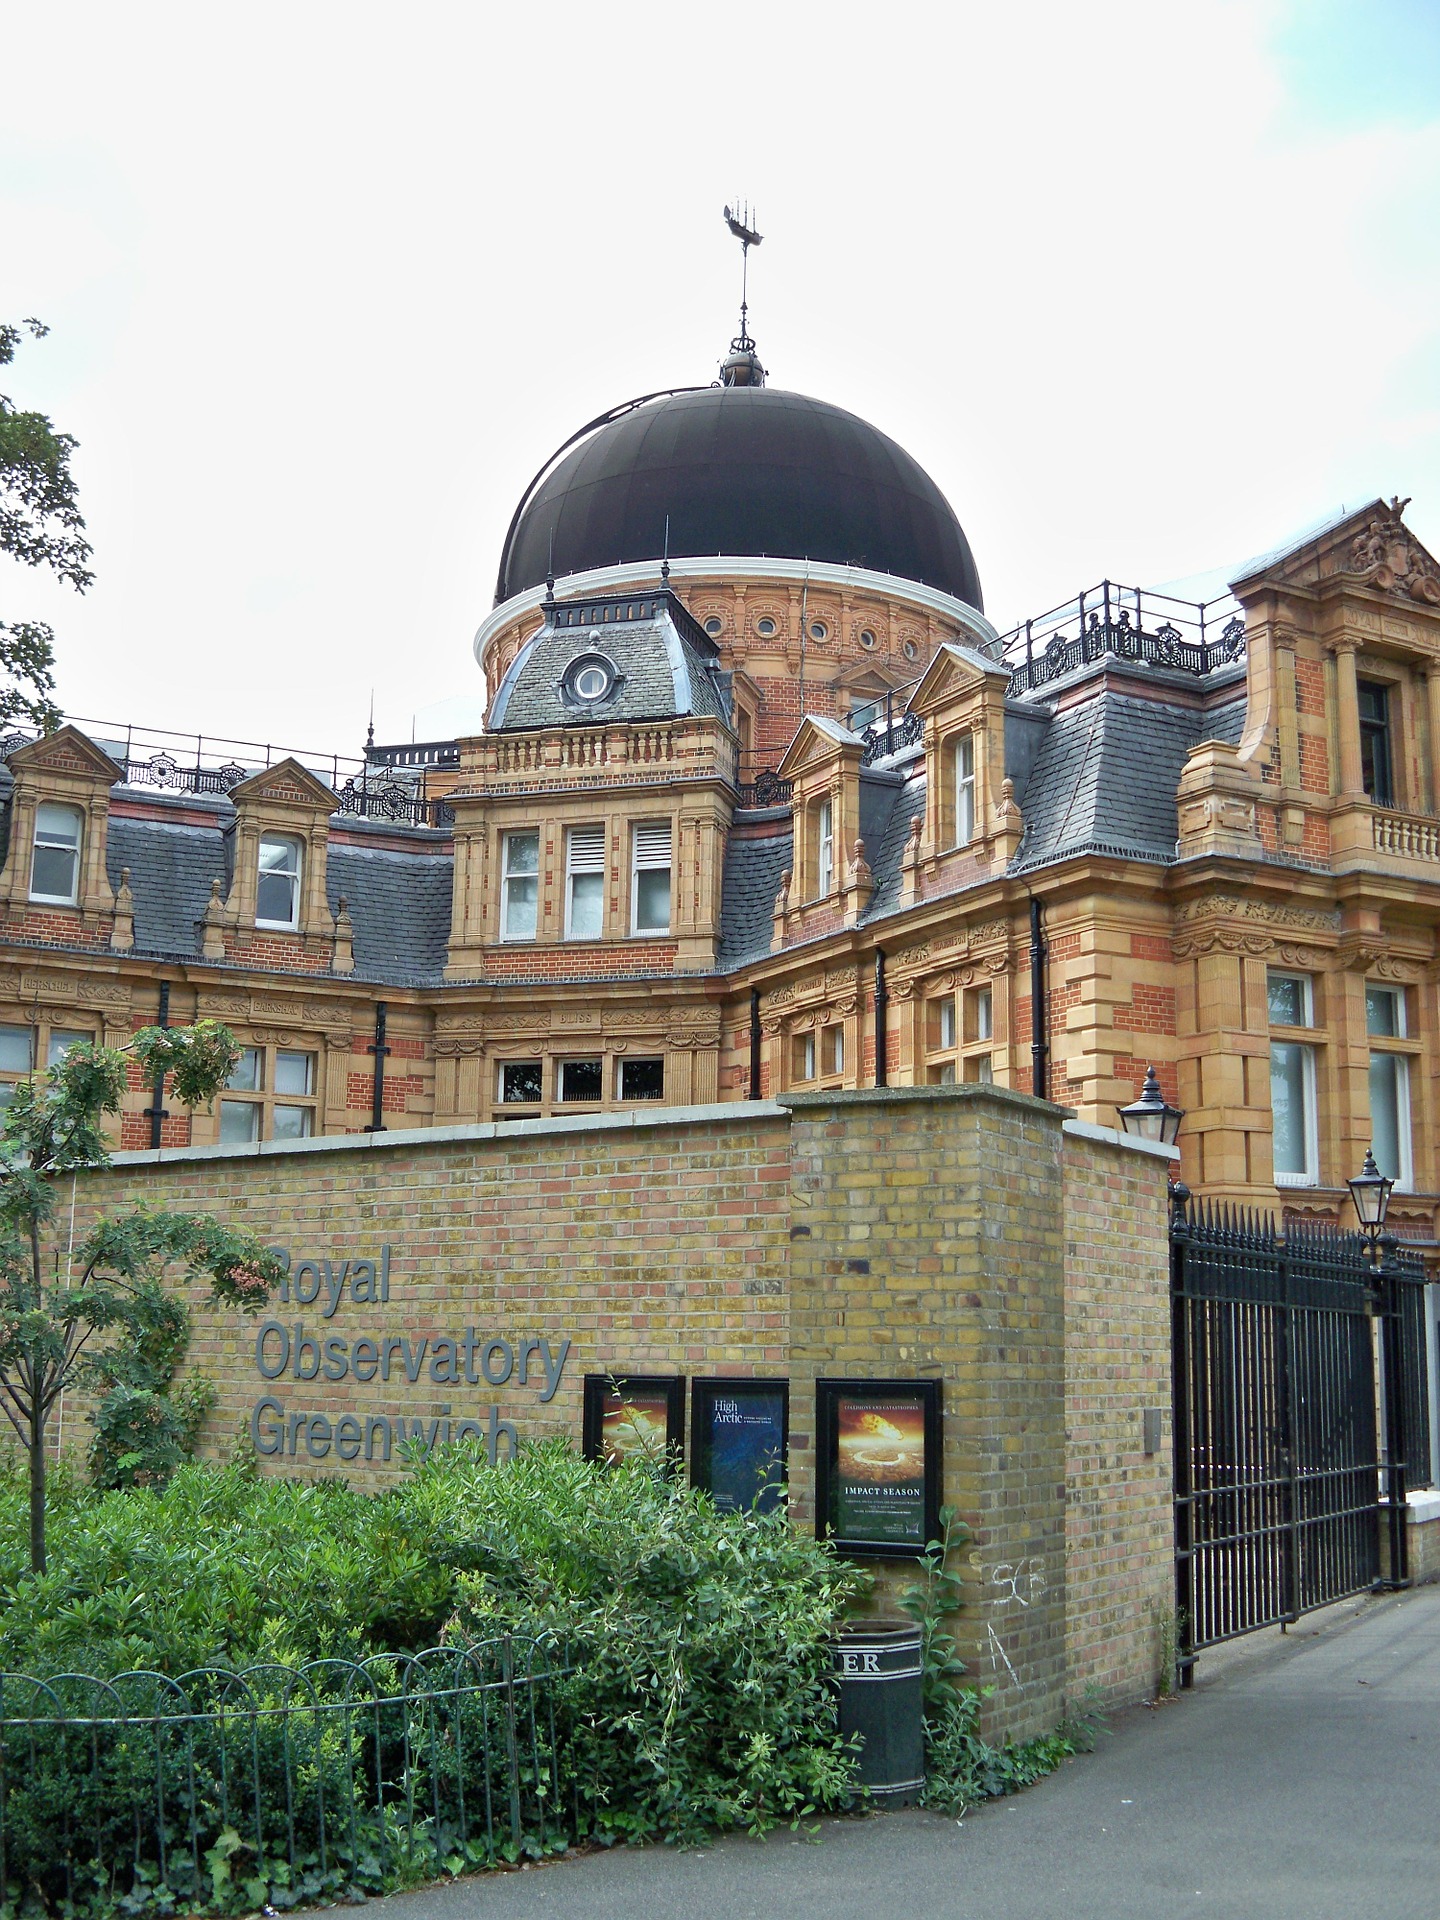 Exterior view of Royal Observatory building